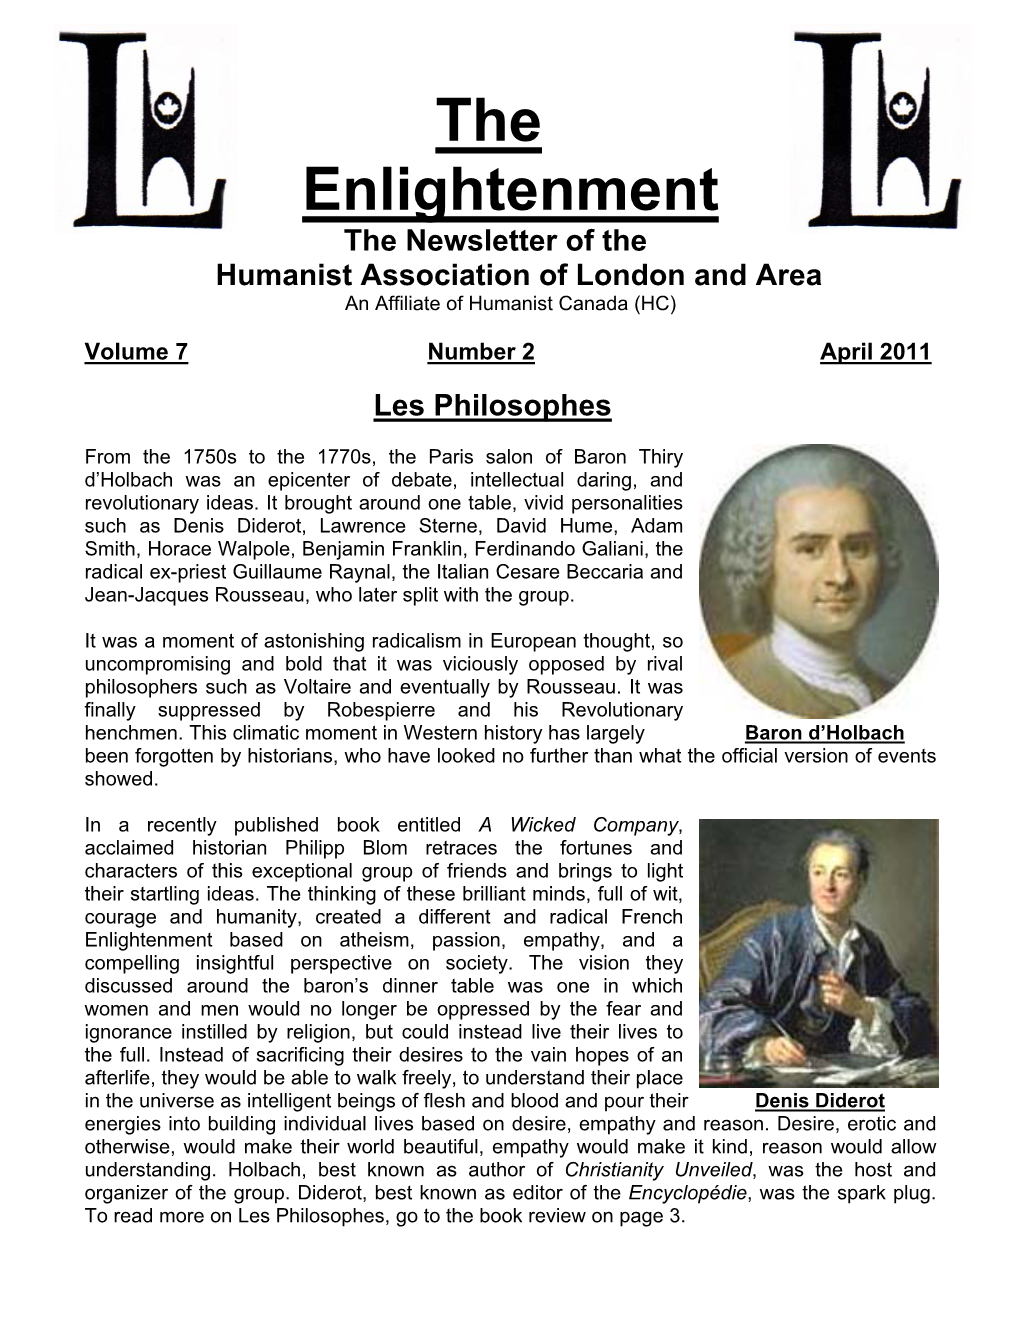 Enlightenment April 2011, the Newsletter of the Humanist